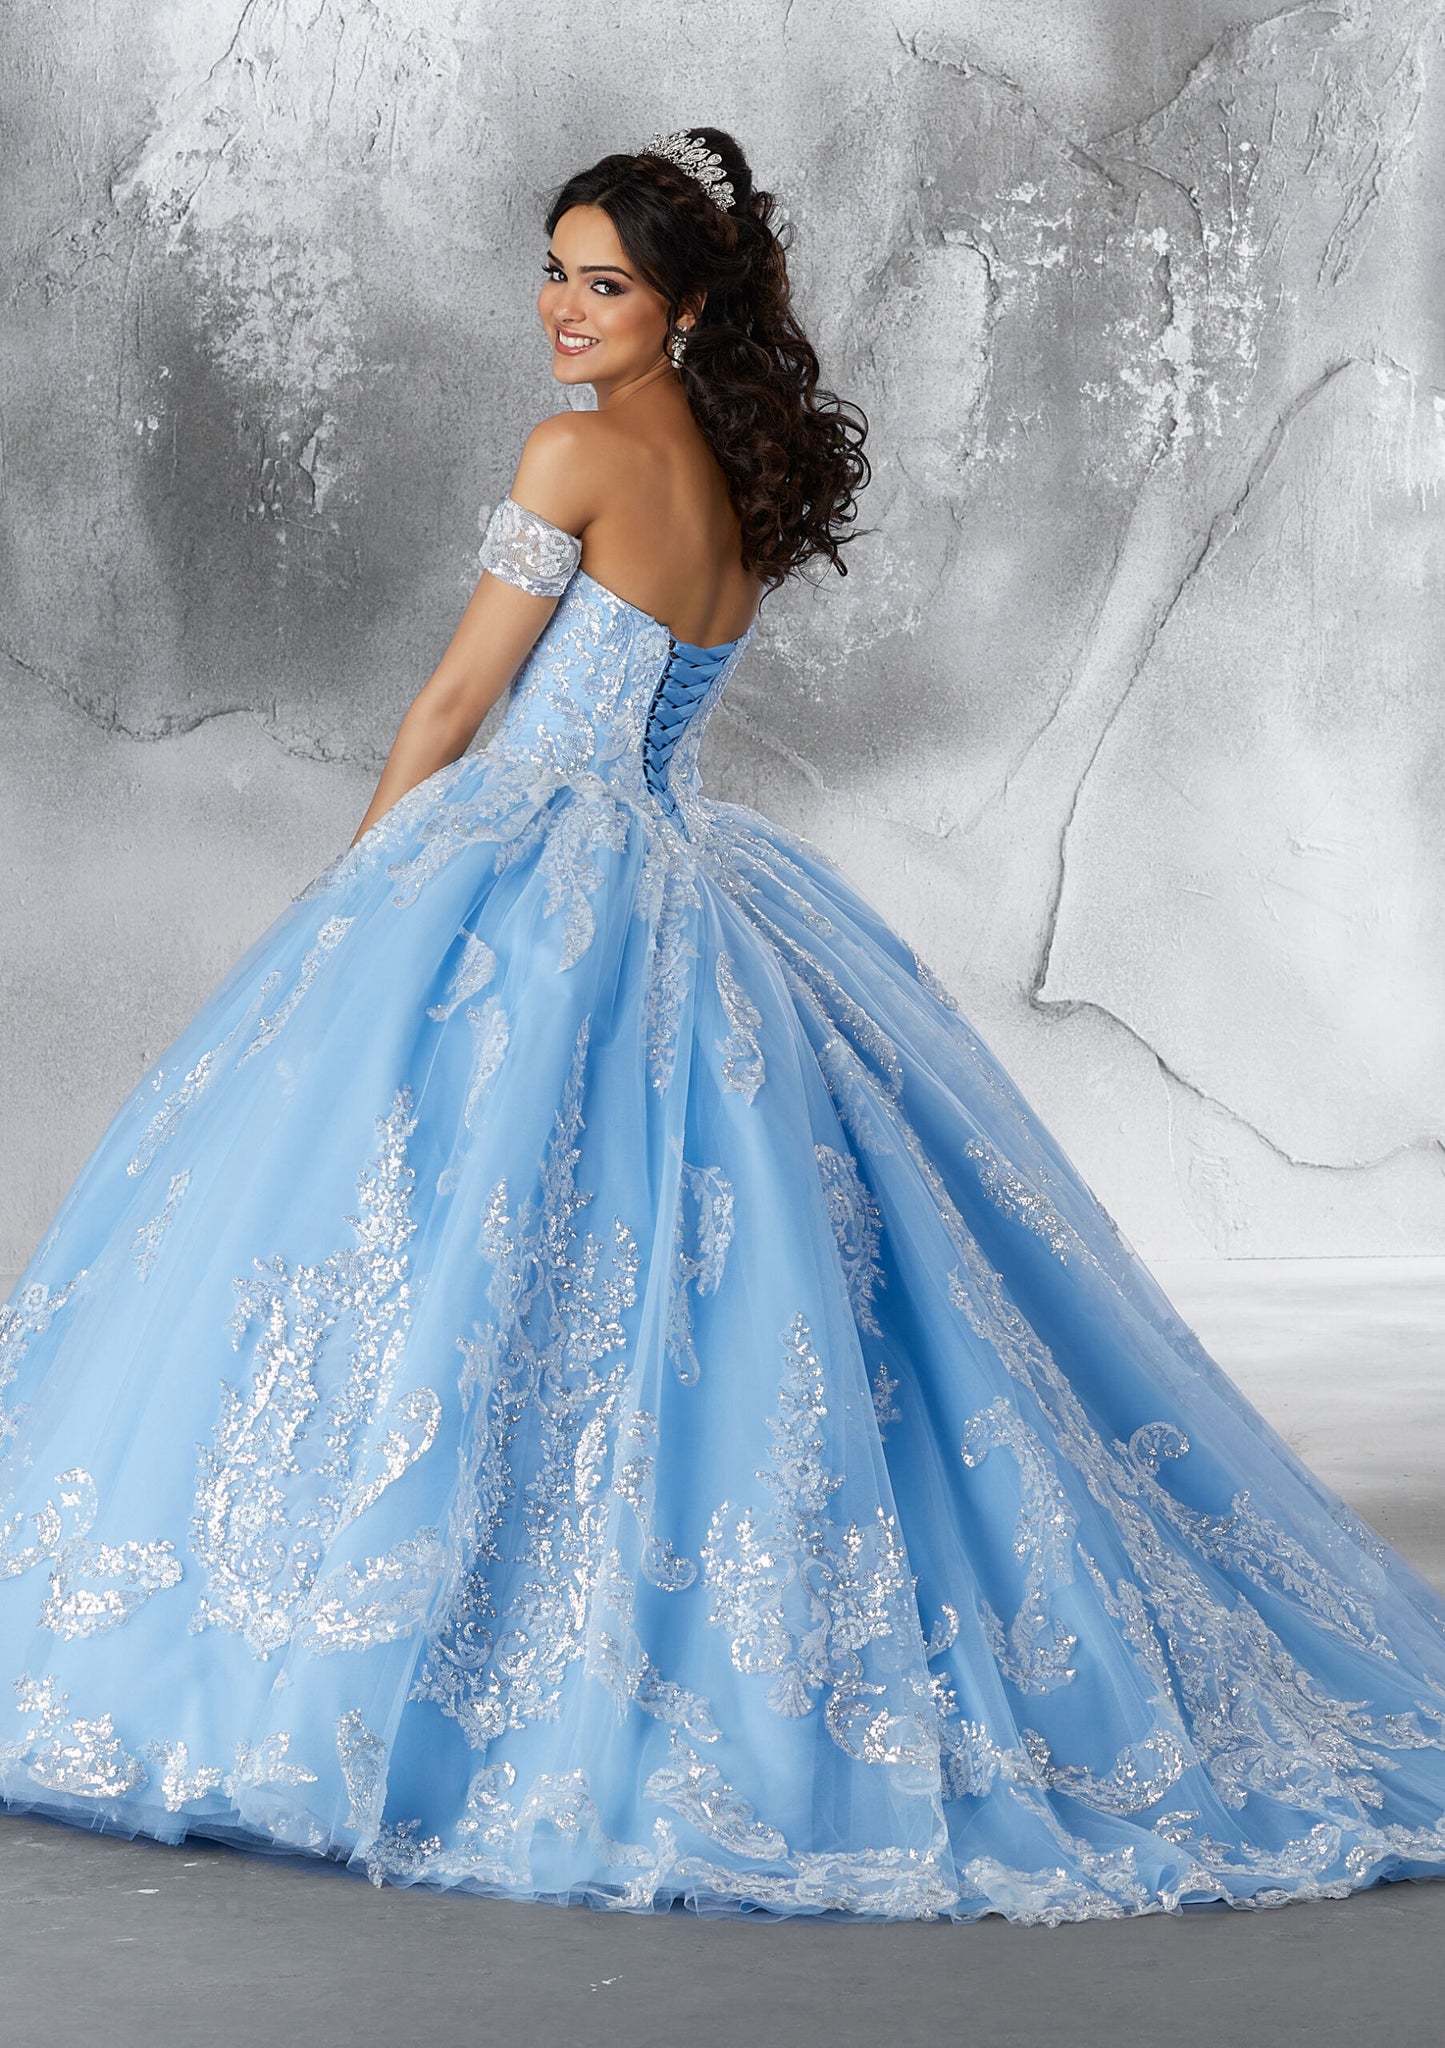 Patterned Sequins on a Tulle Ballgown with Detachable Sleeves